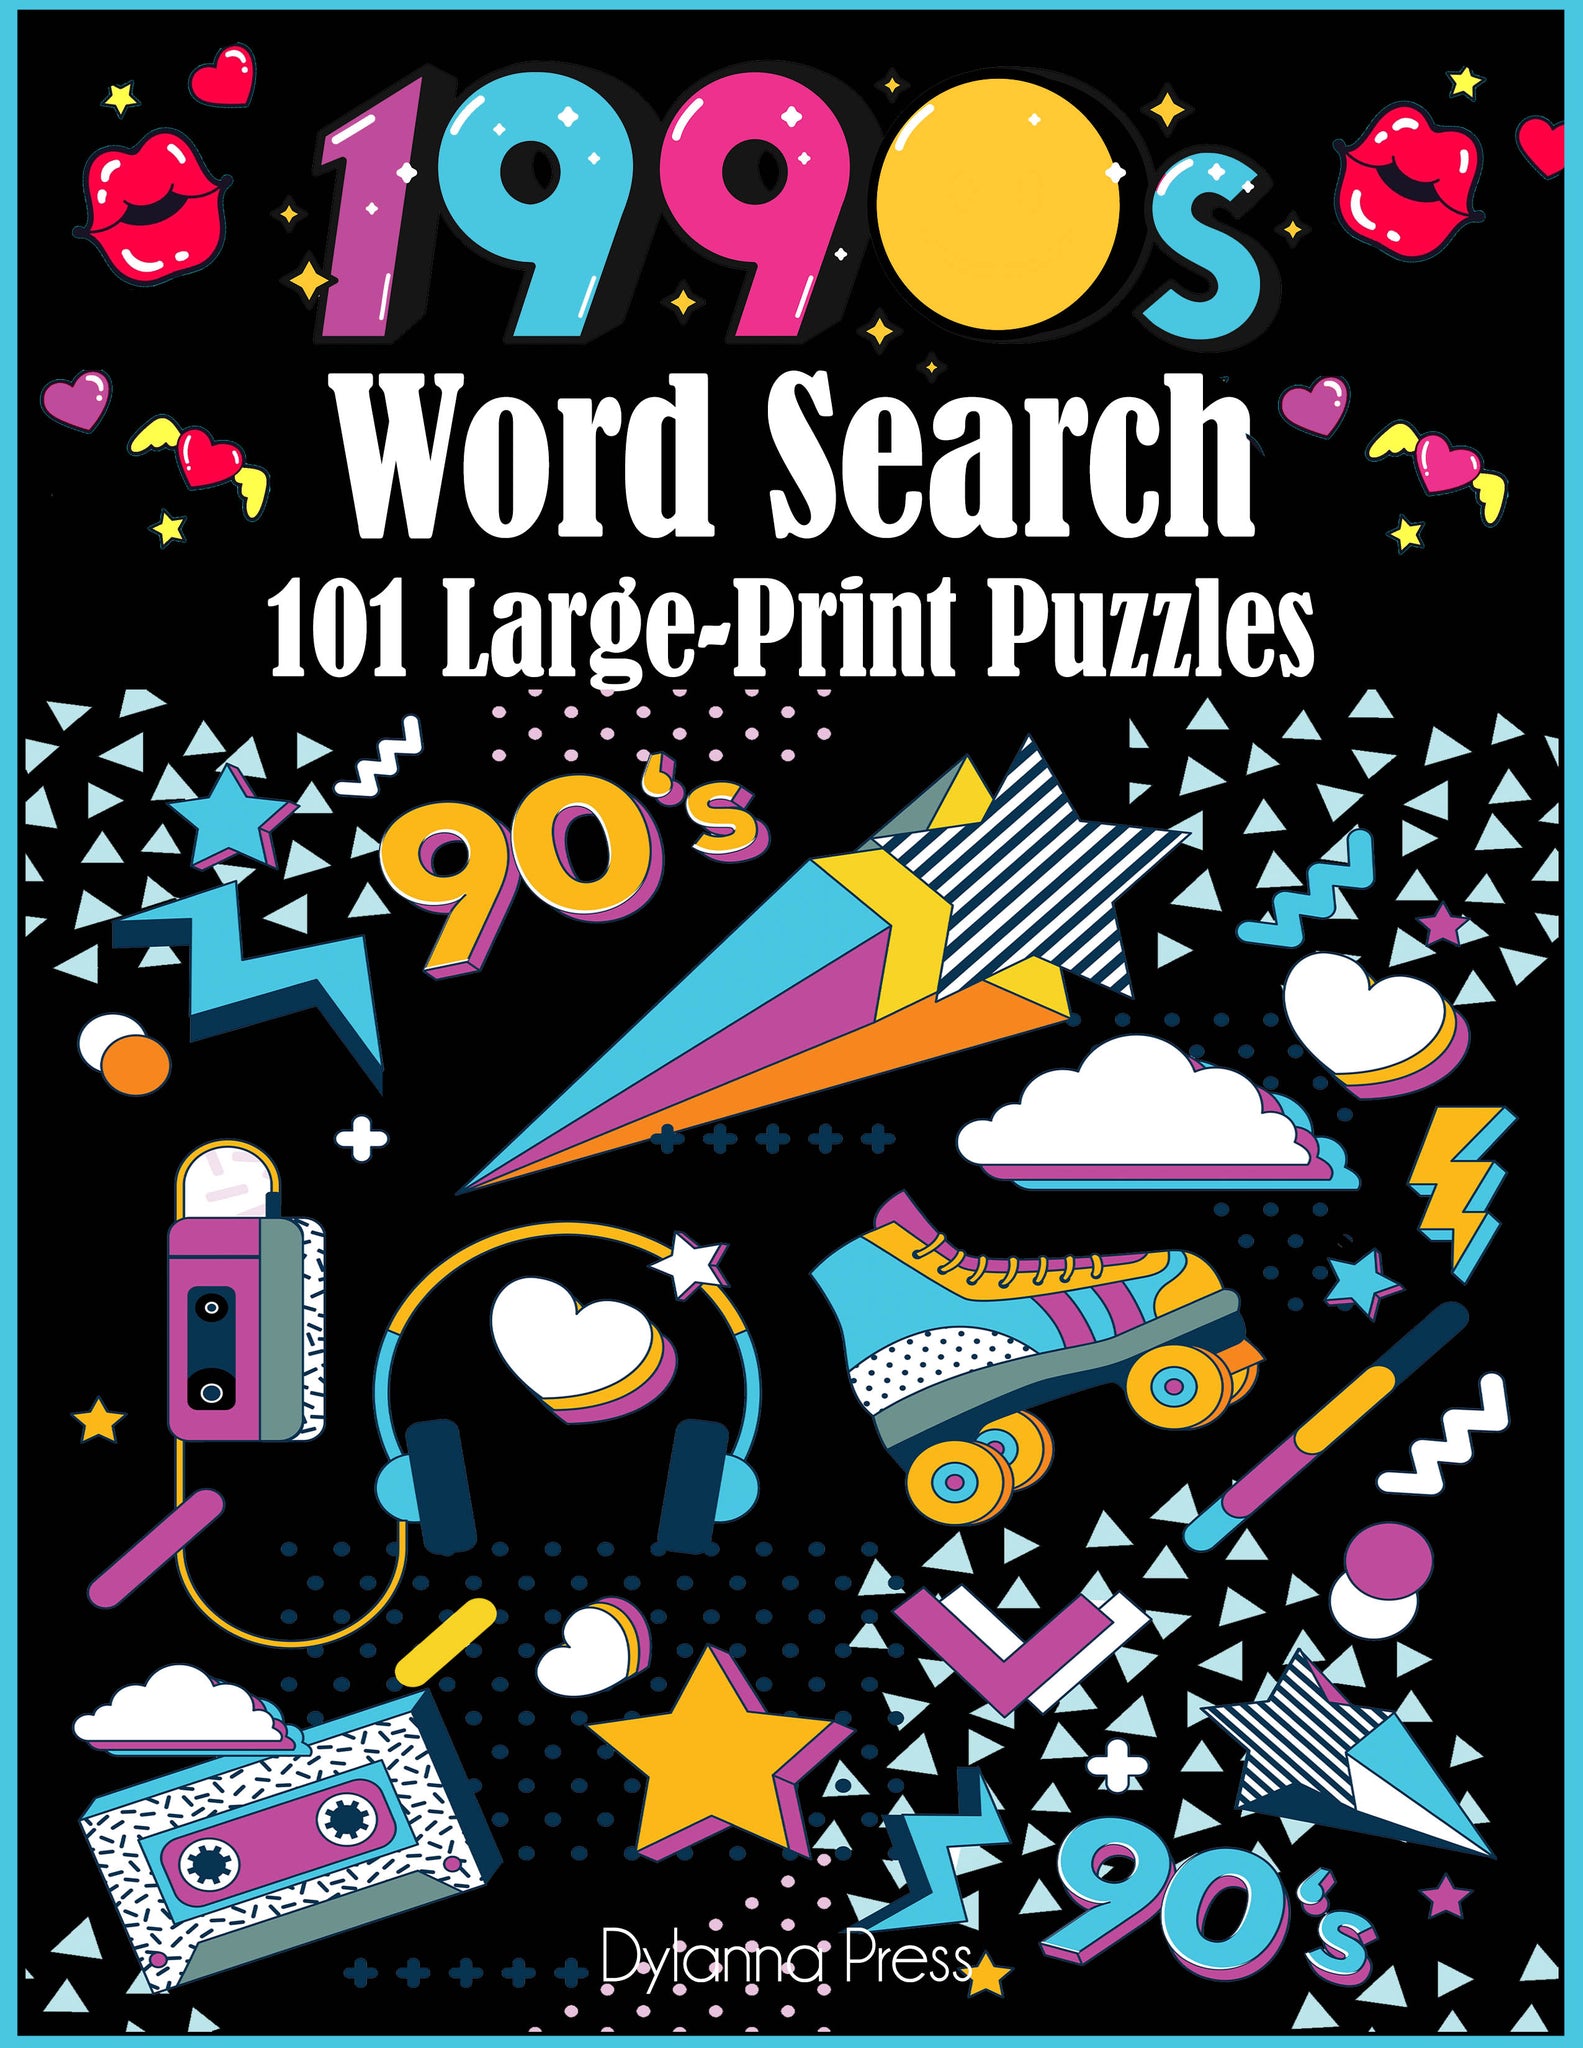 1990s Word Search: Nineties Word Games with 101 Large-Print Puzzles